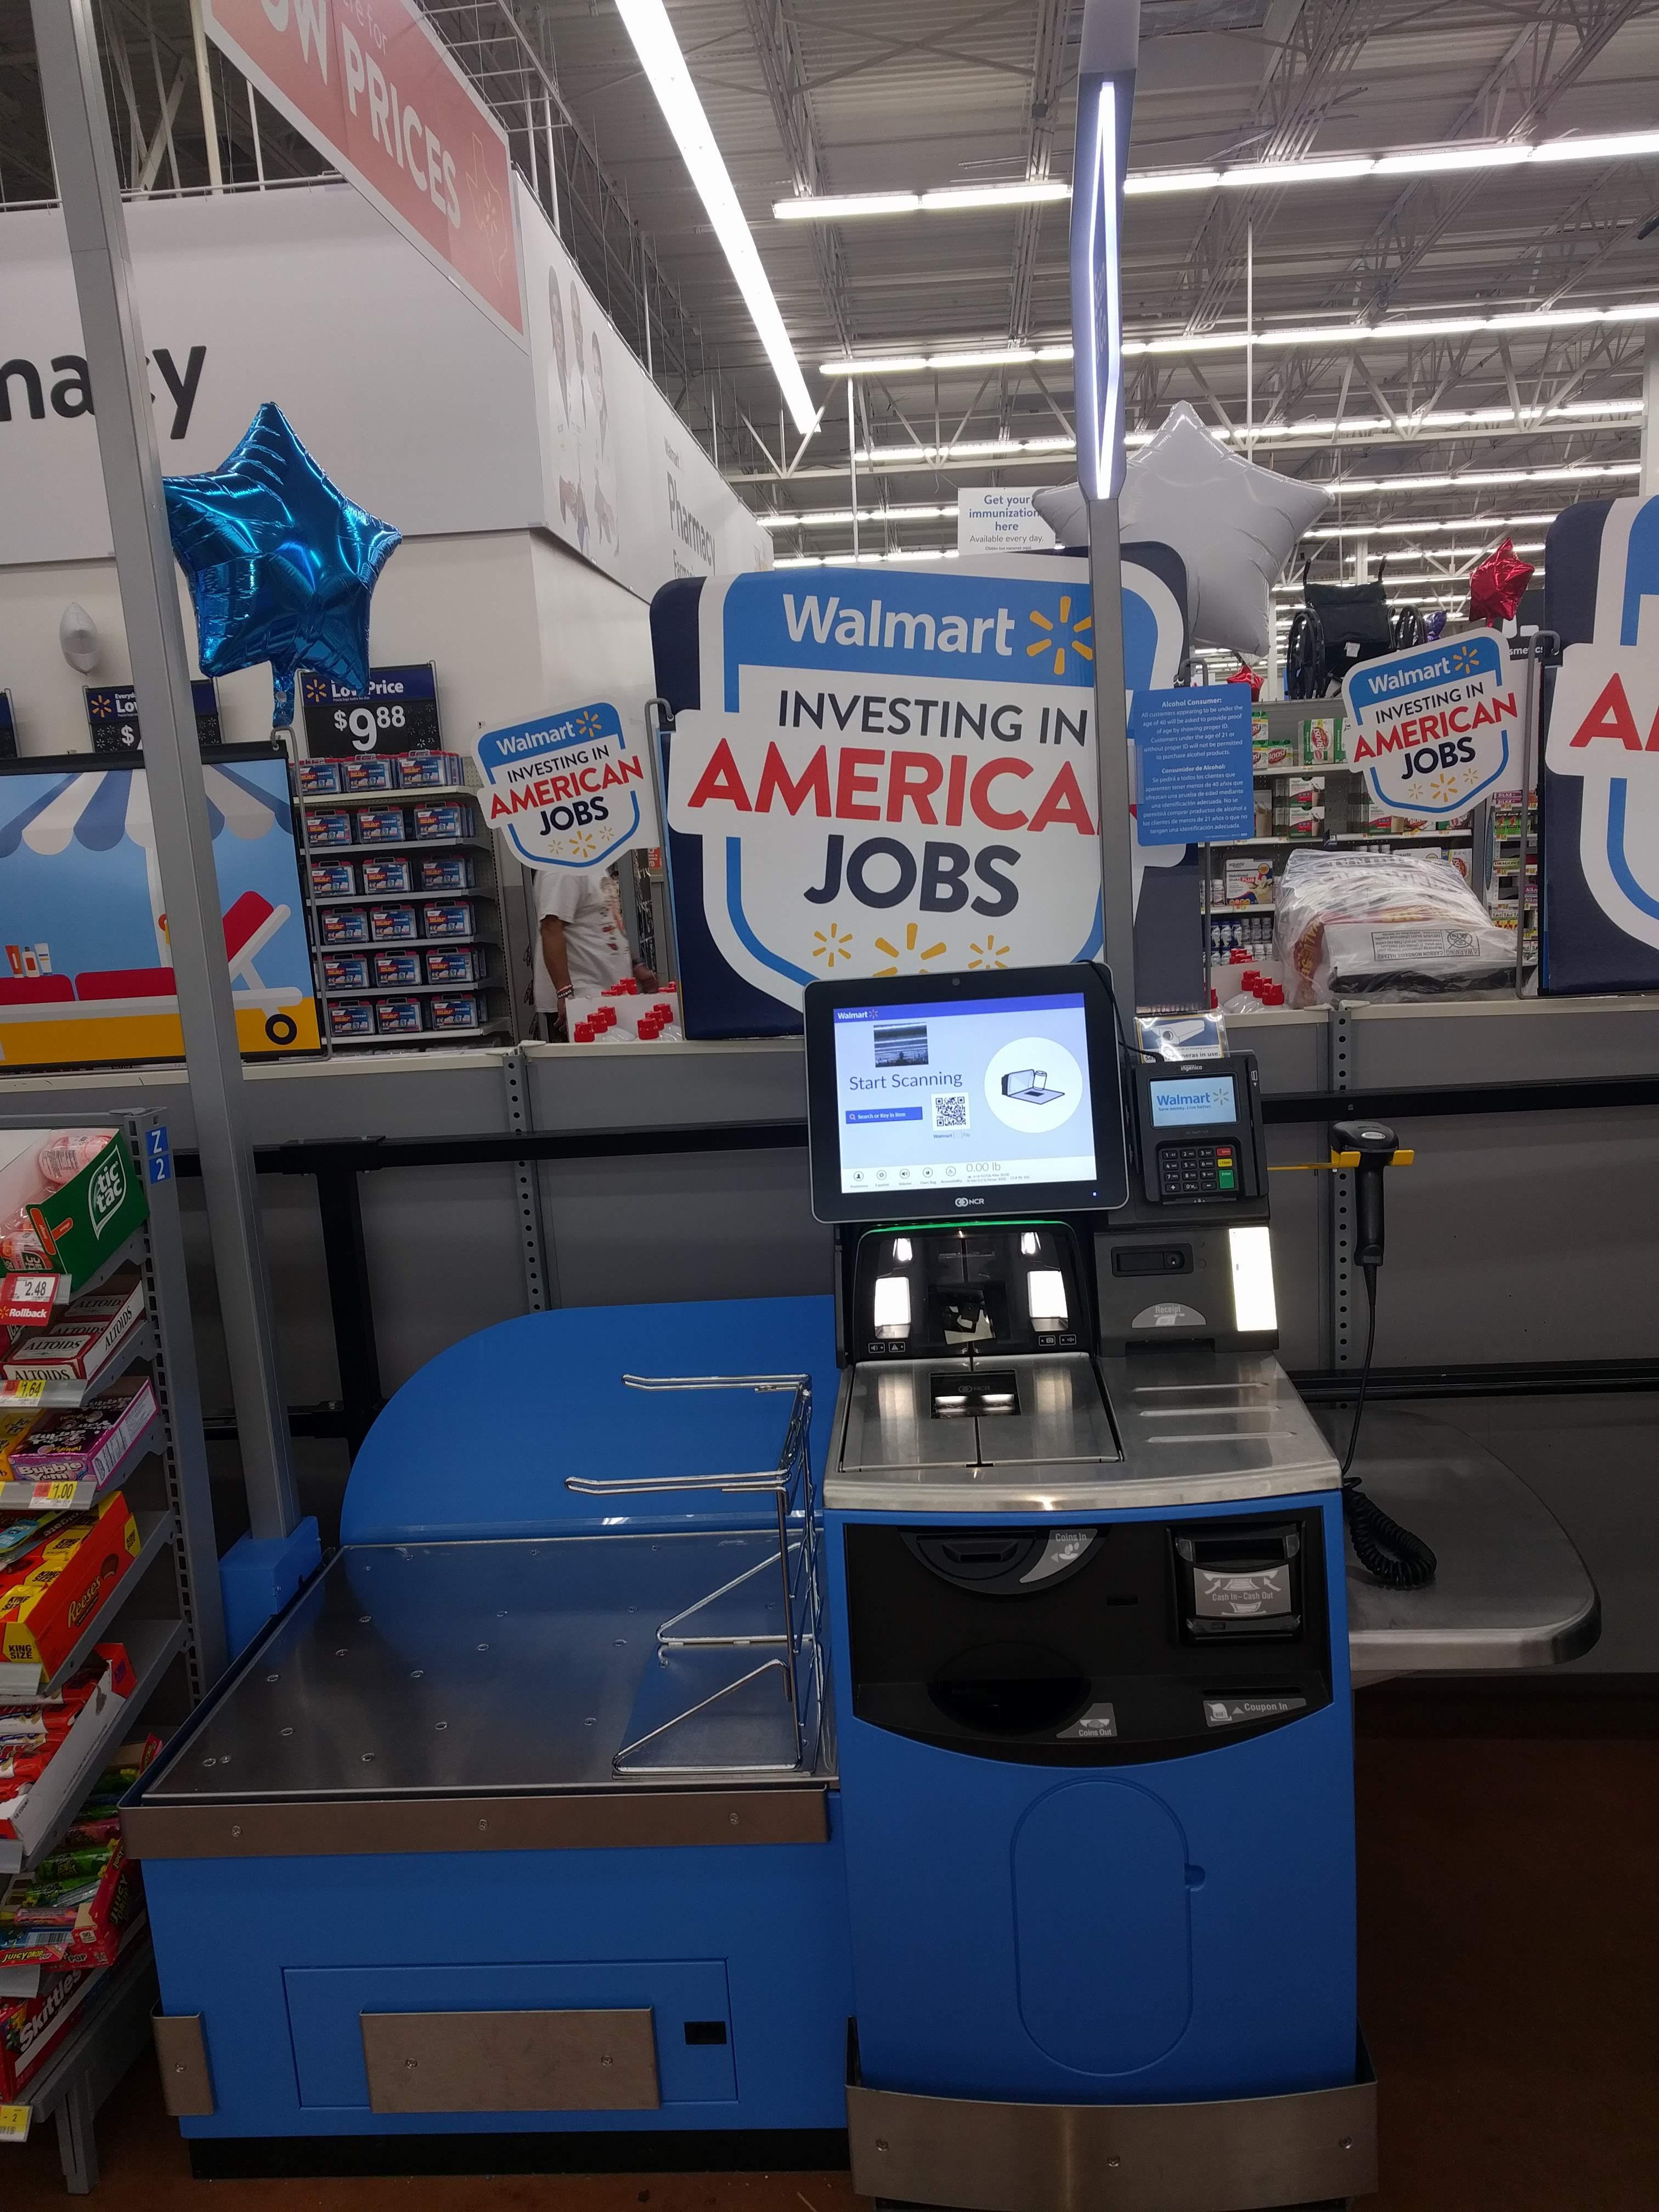 I don't think Walmart really gets it...